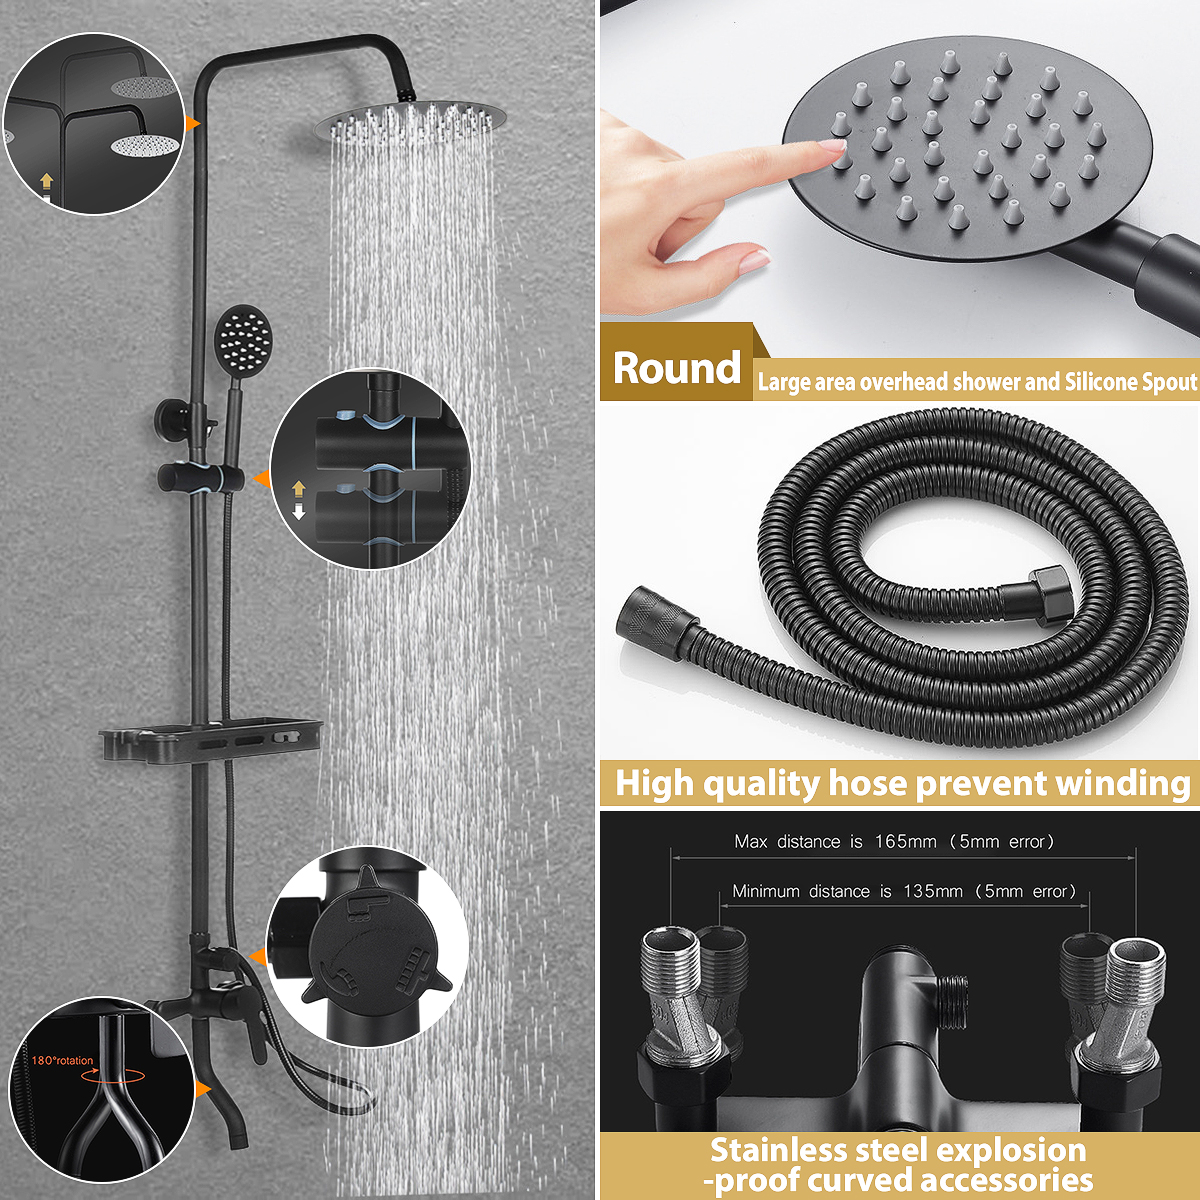 Wall-Mount-Exposed-Shower-System-with-Thermostatic-8-Inch-RoundSquare-Shower-Head-Adjustable-Handhel-1284370-3